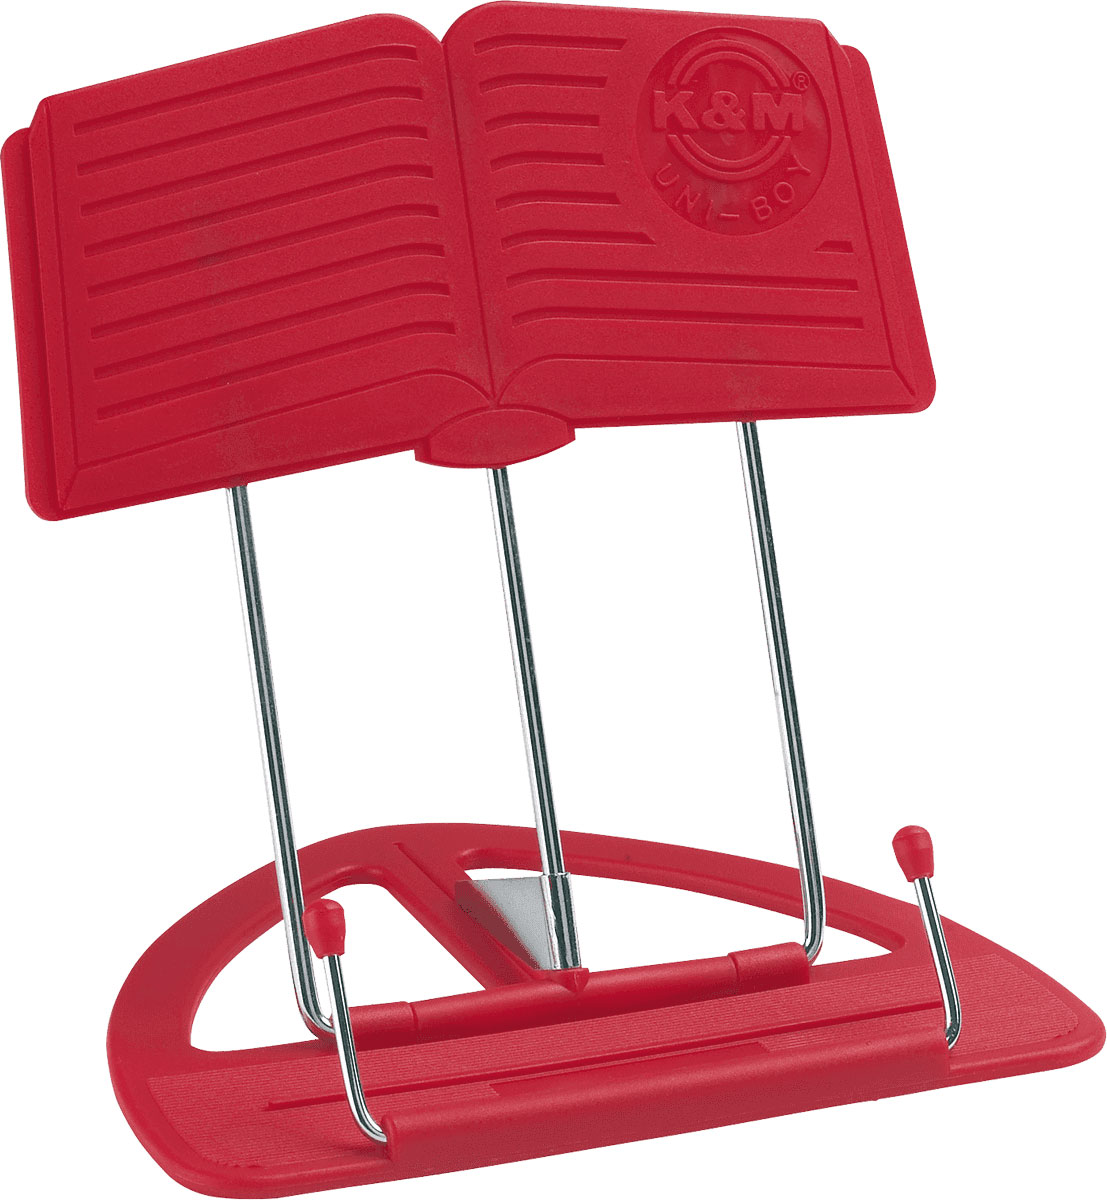 K&M PACK OF 12 RED UNIBOY MUSIC STAND